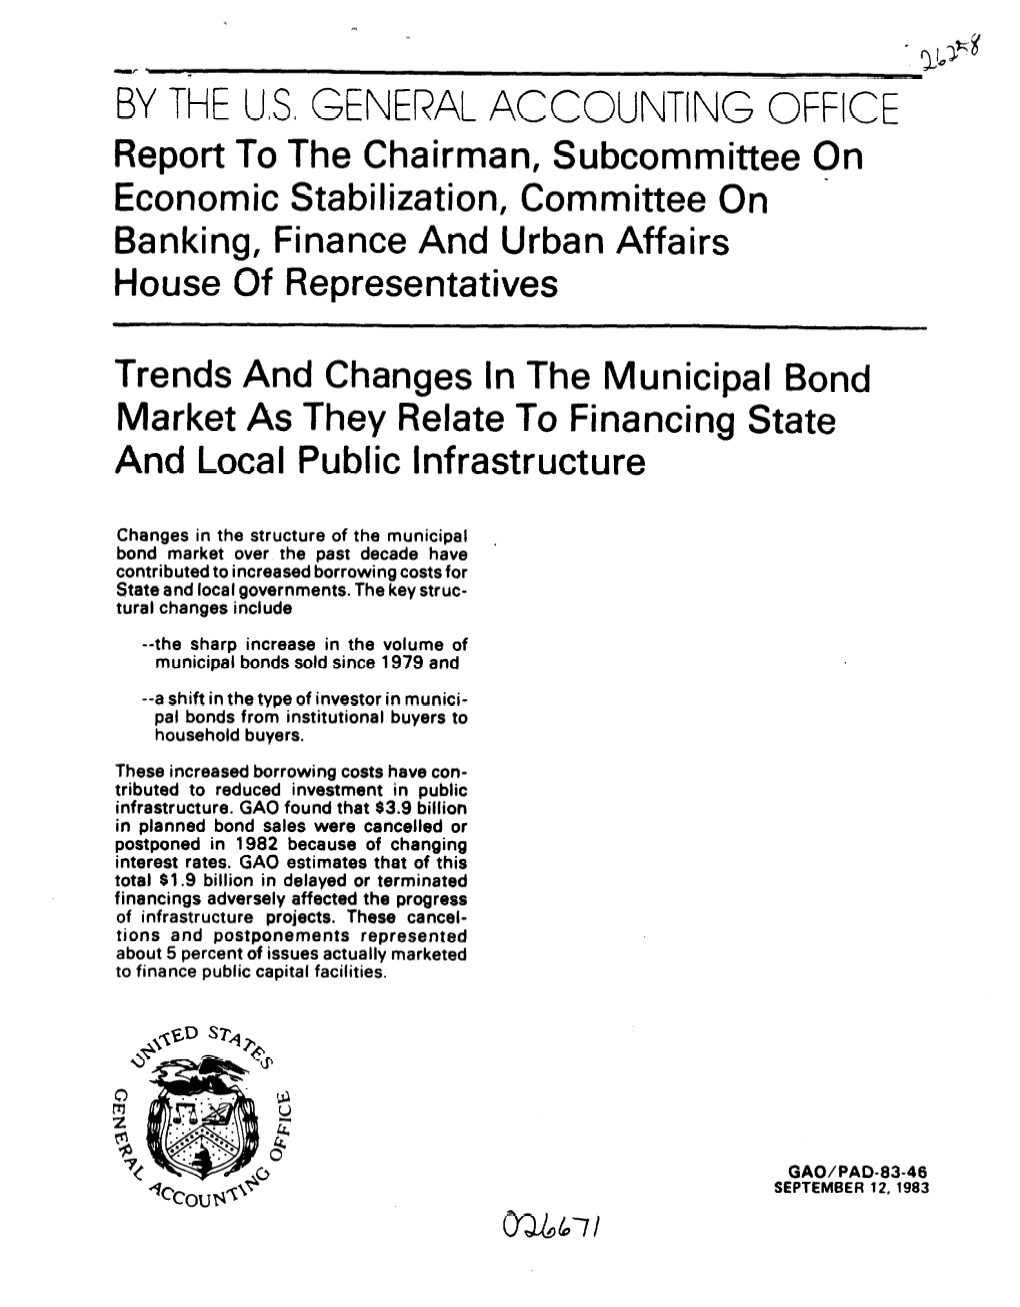 PAD-83-46 Trends and Changes in the Municipal Bond Market As They